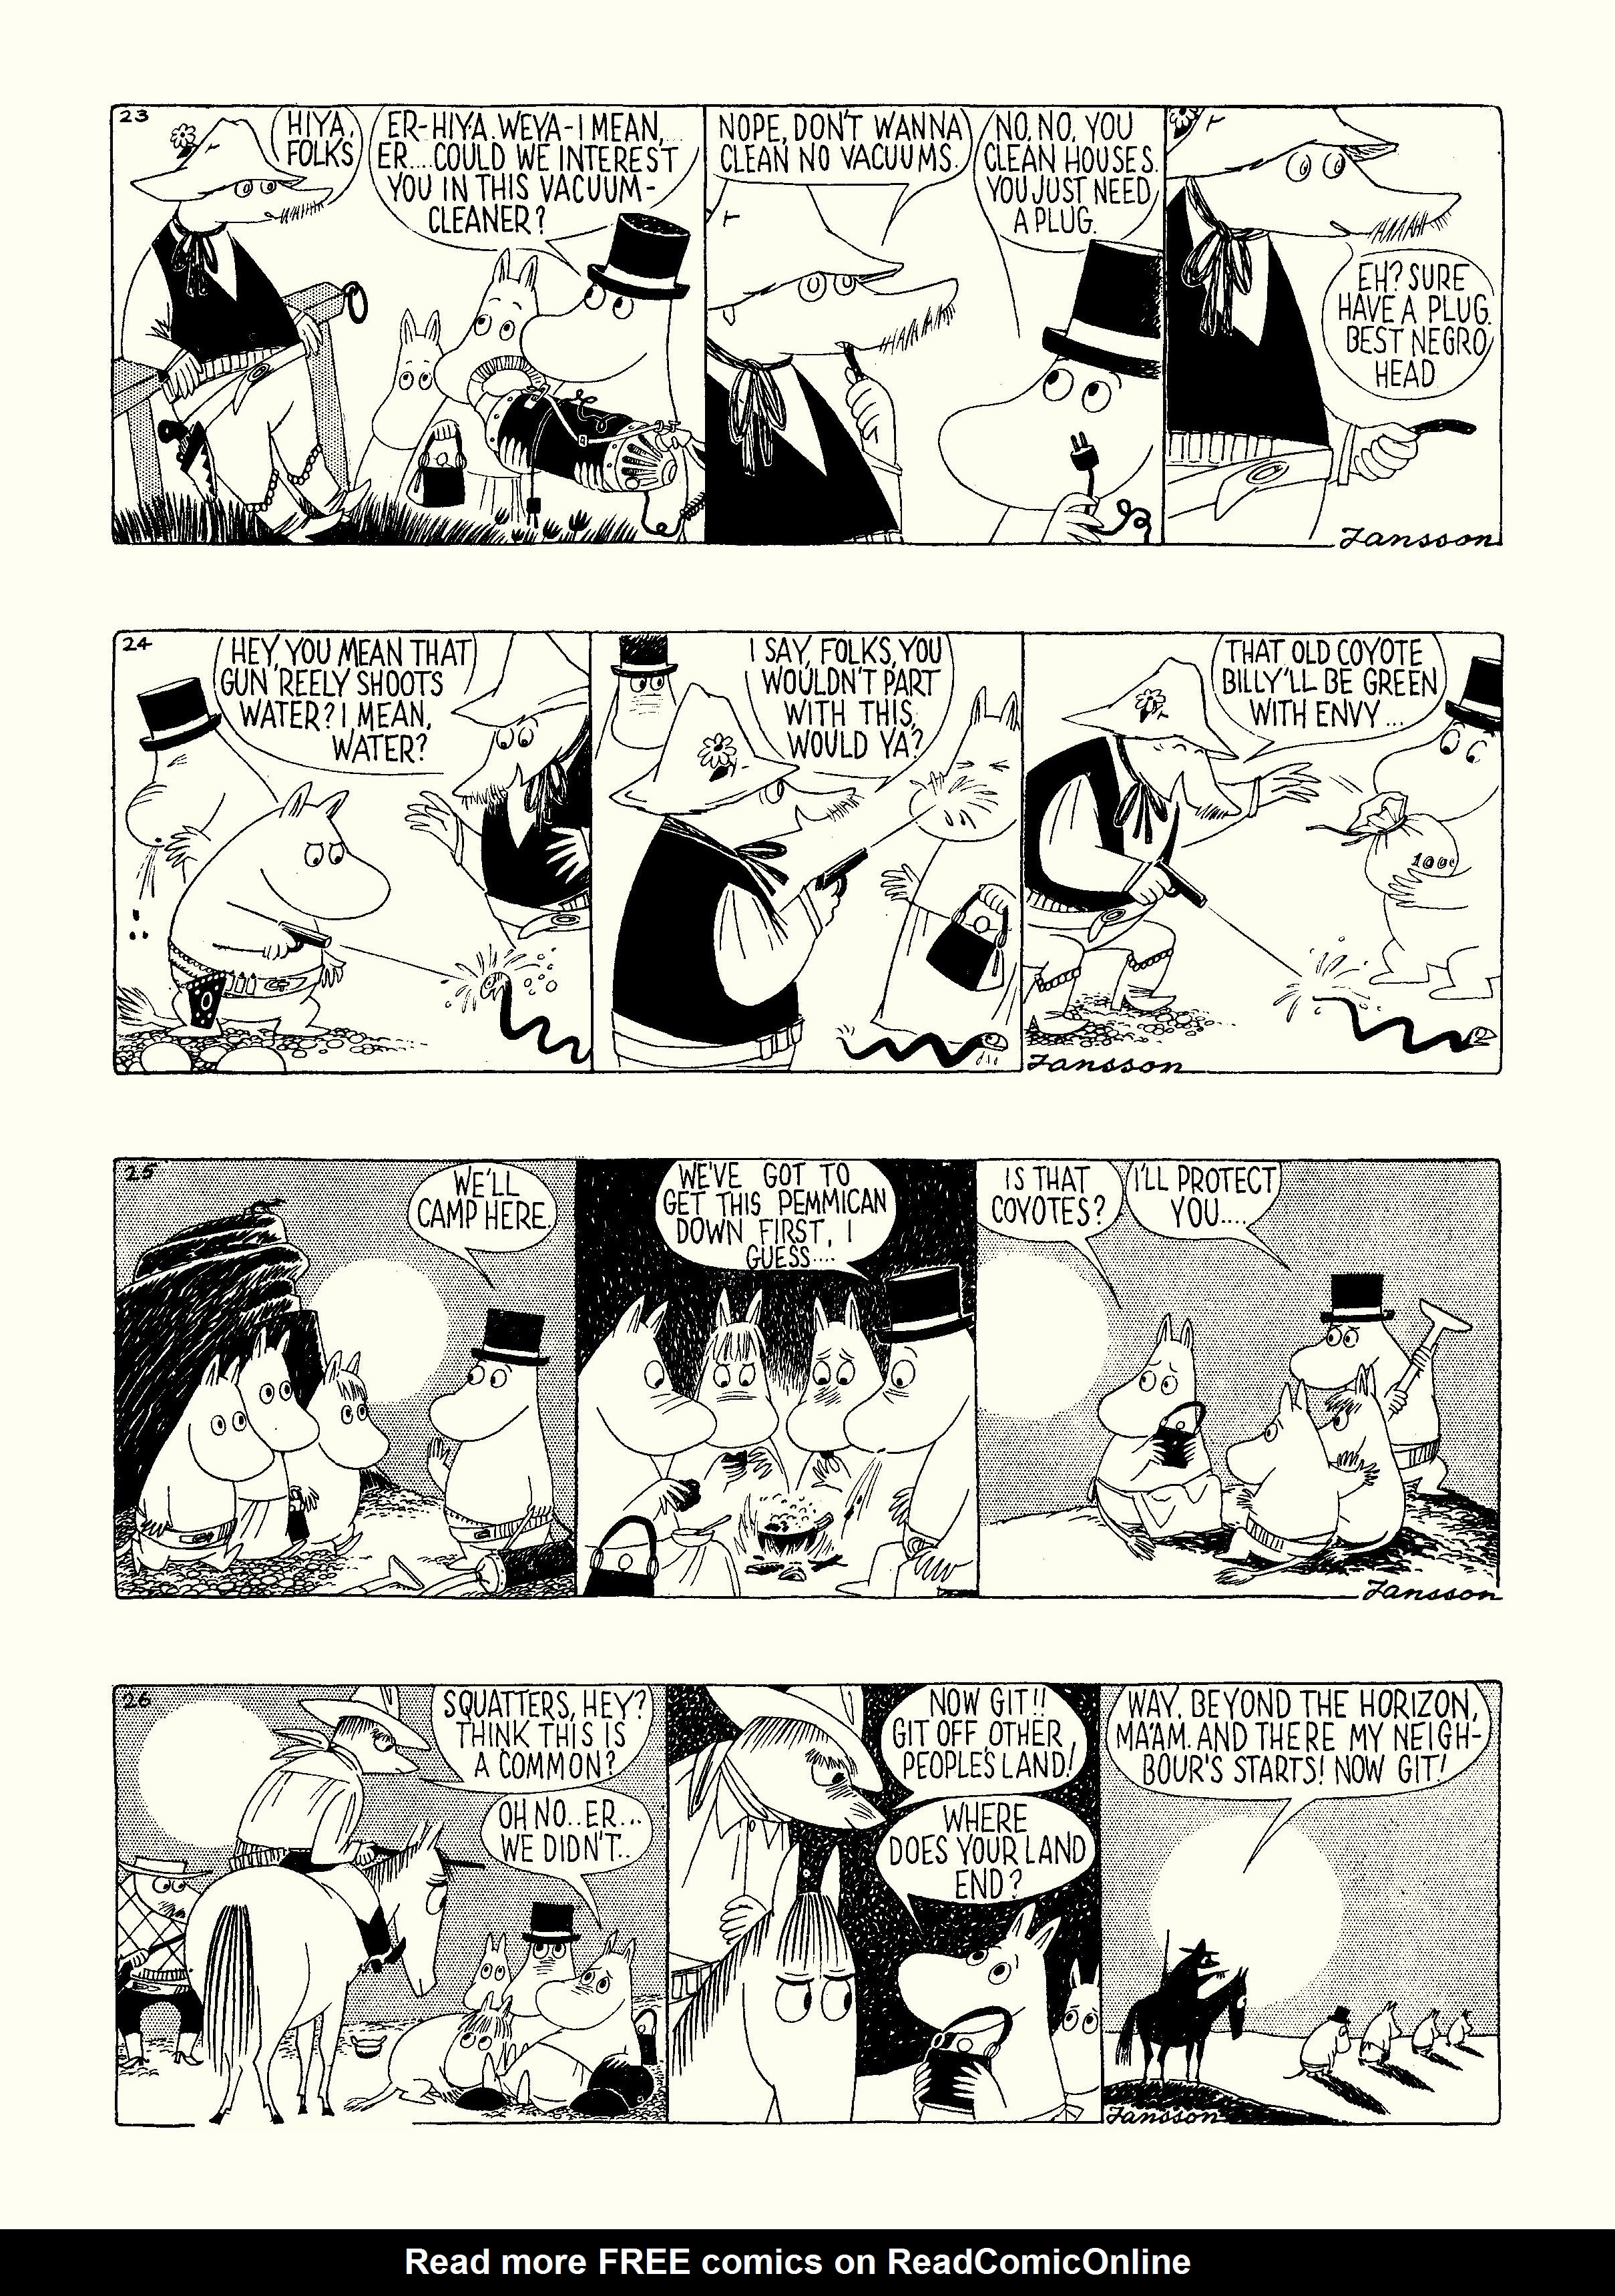 Read online Moomin: The Complete Tove Jansson Comic Strip comic -  Issue # TPB 4 - 12